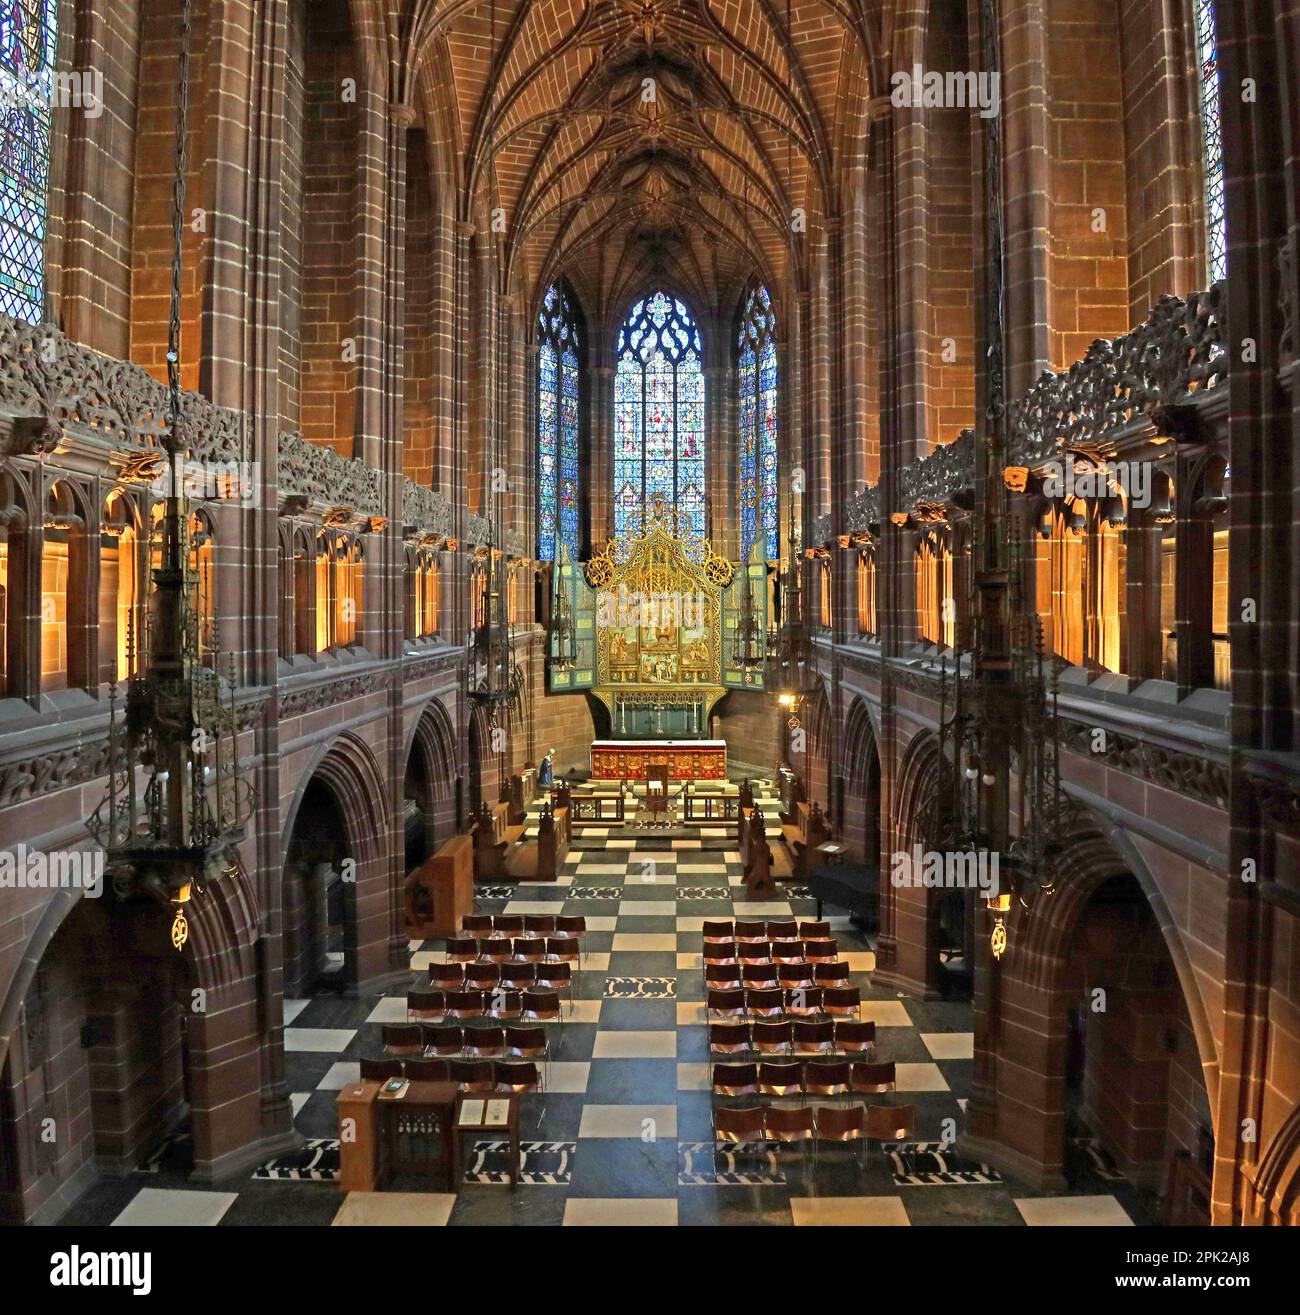 Scotts Lady Chapel in Liverpool Anglican Cathedral, St. James' Mount, Liverpool, Merseyside, England, UK, L1 7AZ Stockfoto